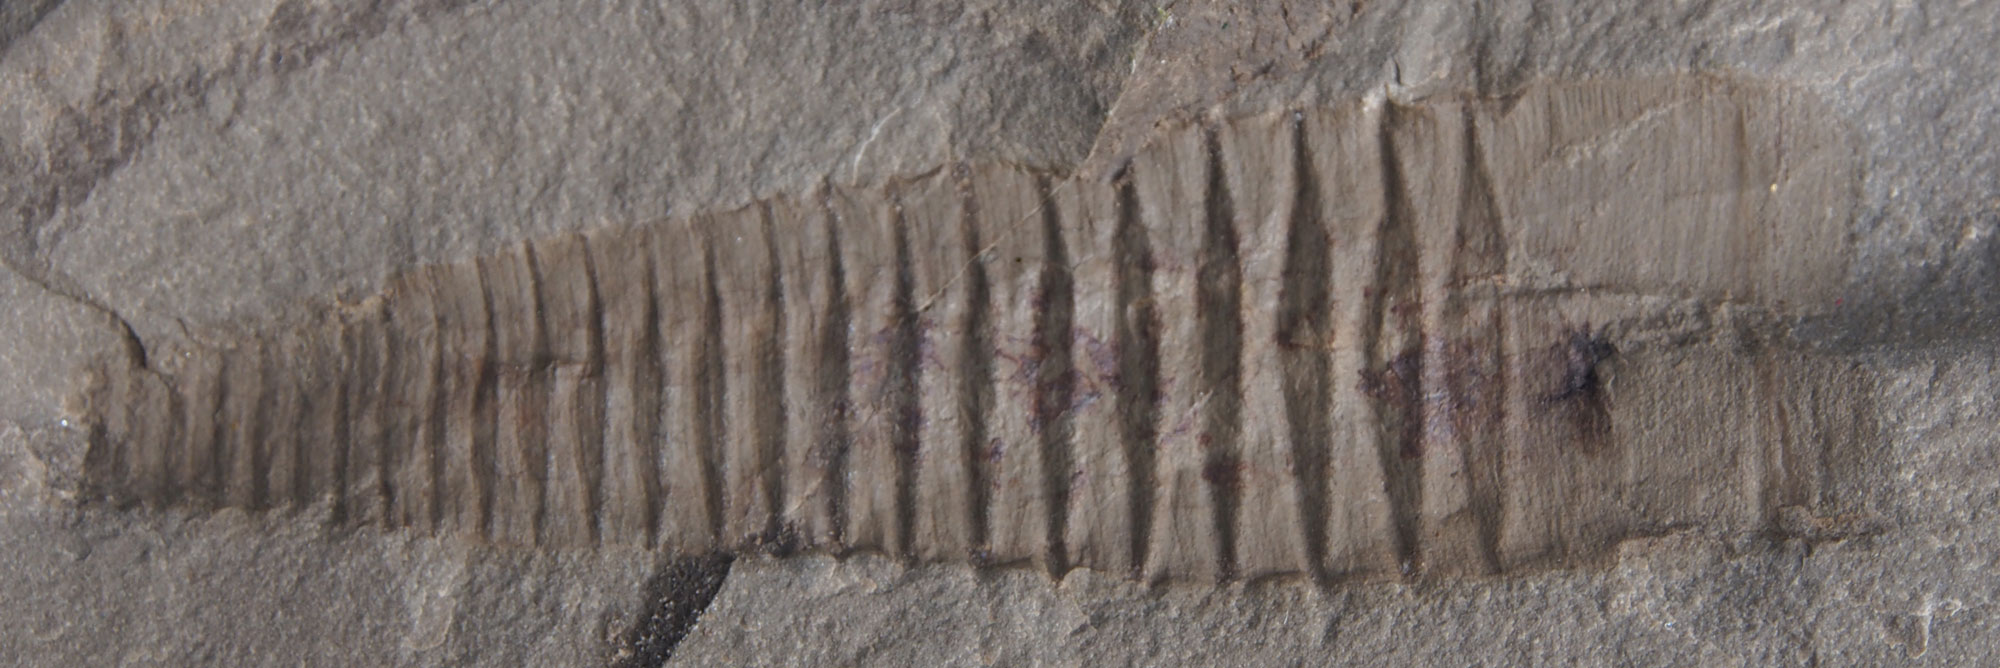 Photograph of a fossil cephalopod shell from the Mississippian Bear Gulch fauna of Montana. The photo shows an impression of a slightly tapering straight shell, with the widest end to the right. The shell has a regular series of stripes or lines running perpendicular to its long axis.